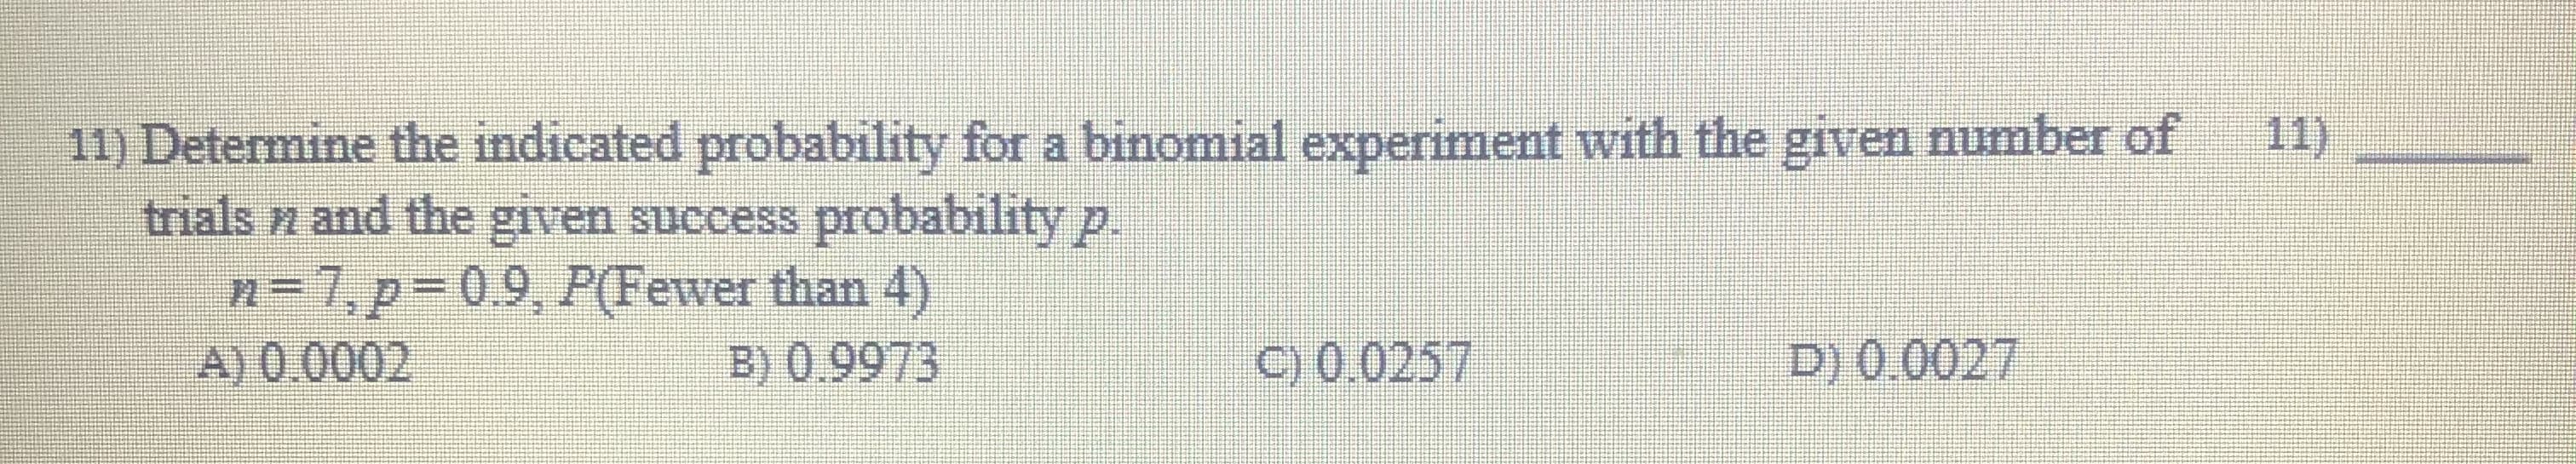 11) Determine the indicated probability for a binomial experiment with the given number of
trials n and the given success probability p.
n-7,p-0.9, P(Fewer than 4)
A) 0.0002
B) 0.9973
C) 0.0257
D) 0.0027
